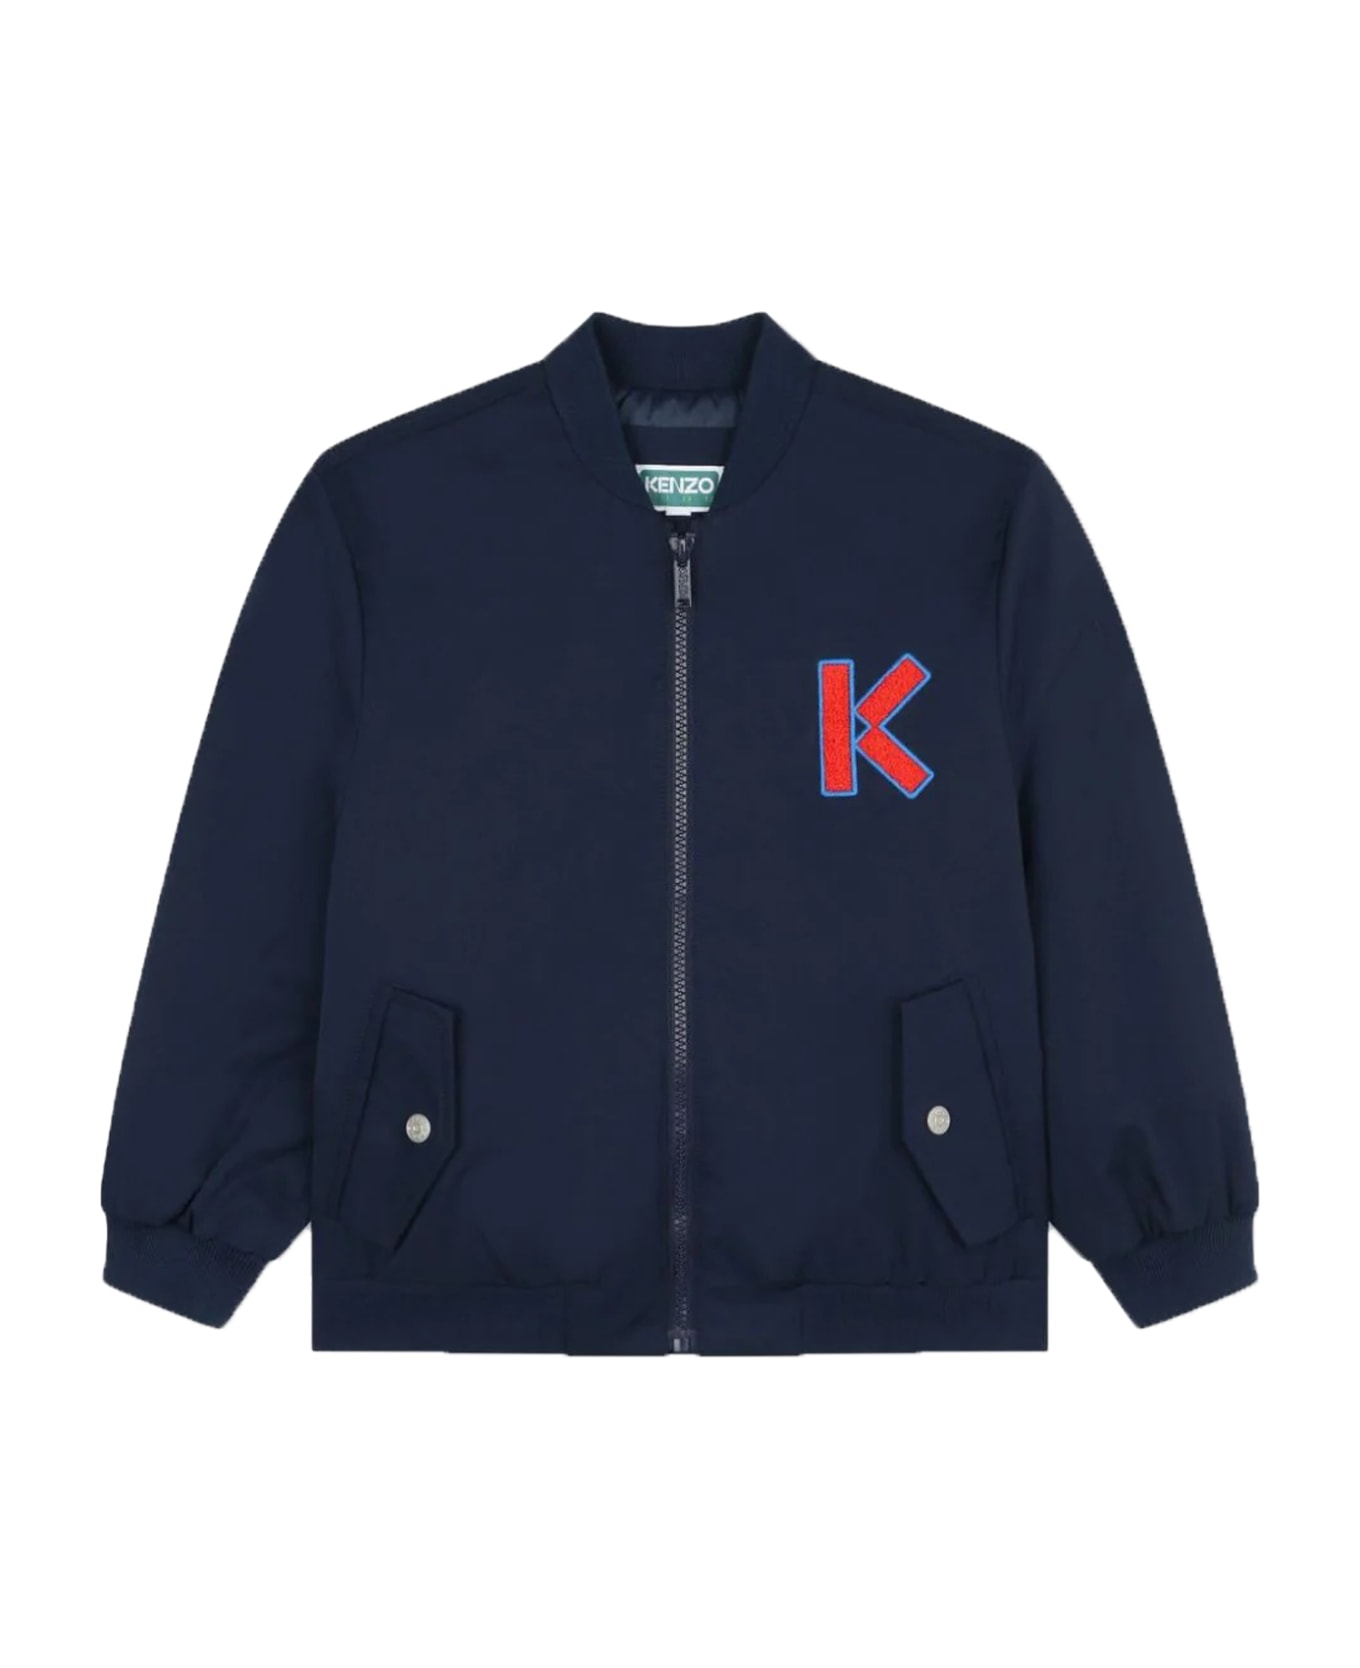 Kenzo Kids Jacket With Zip And Embroidery - Blue